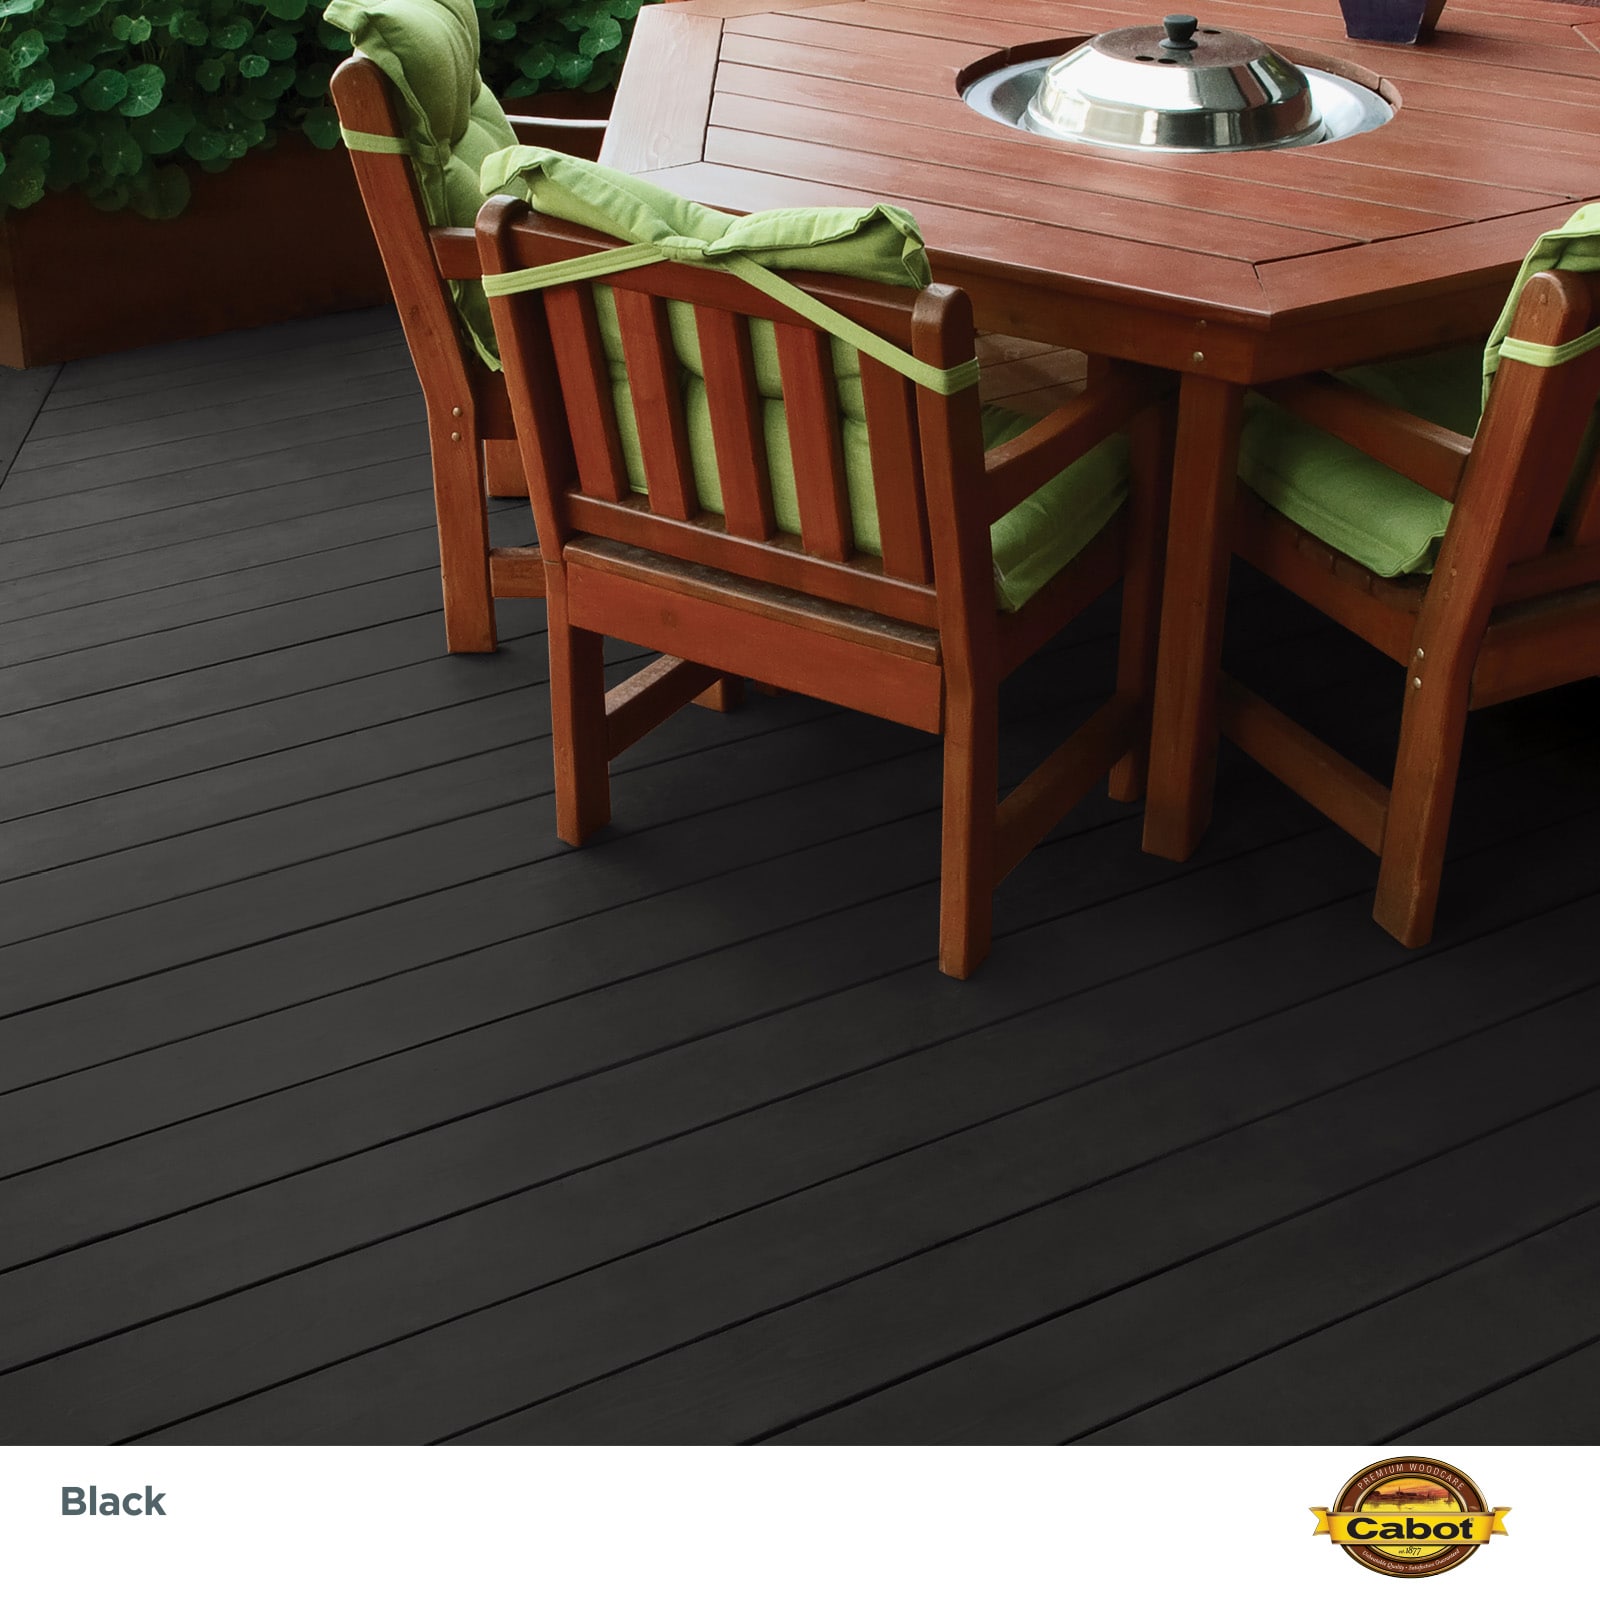 (1-Gallon) Wood Exterior the Black Exterior department Solid Sealer Cabot Stains in at Stain and